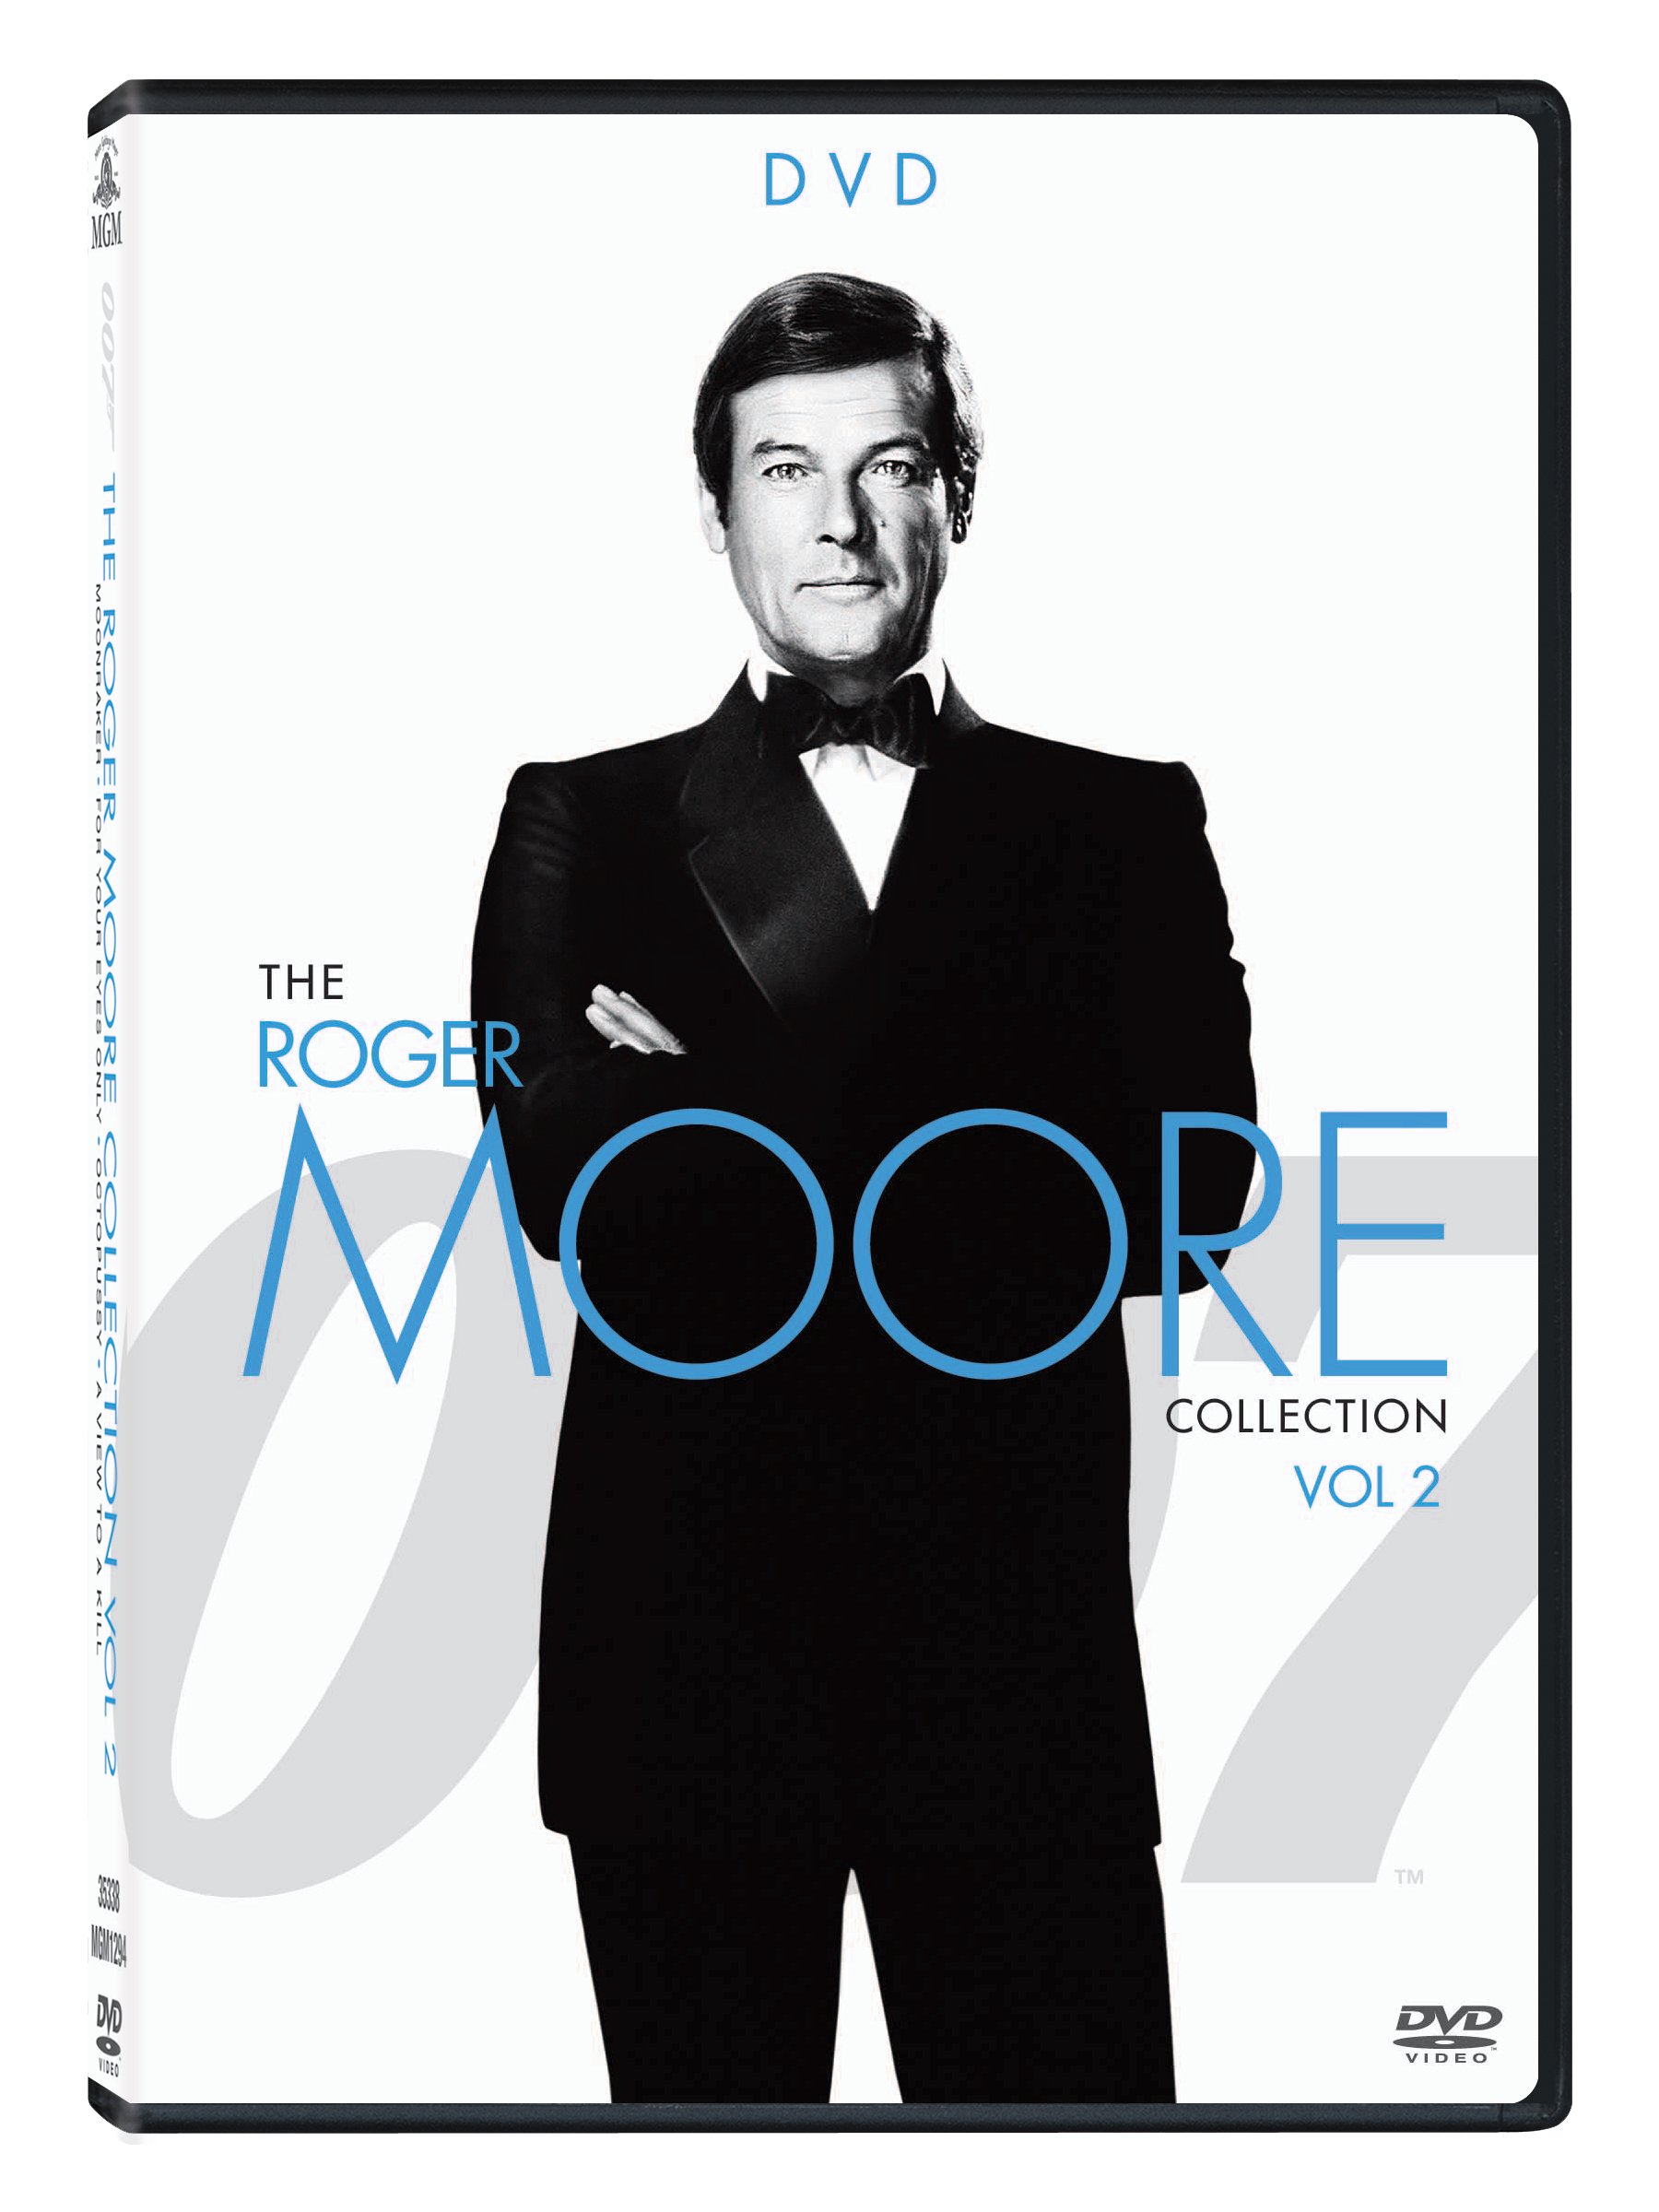 007-roger-moore-as-james-bond-vol-2-4-movies-collection-moonraker-for-your-eyes-only-octopussy-a-view-to-kill-4-disc-box-set